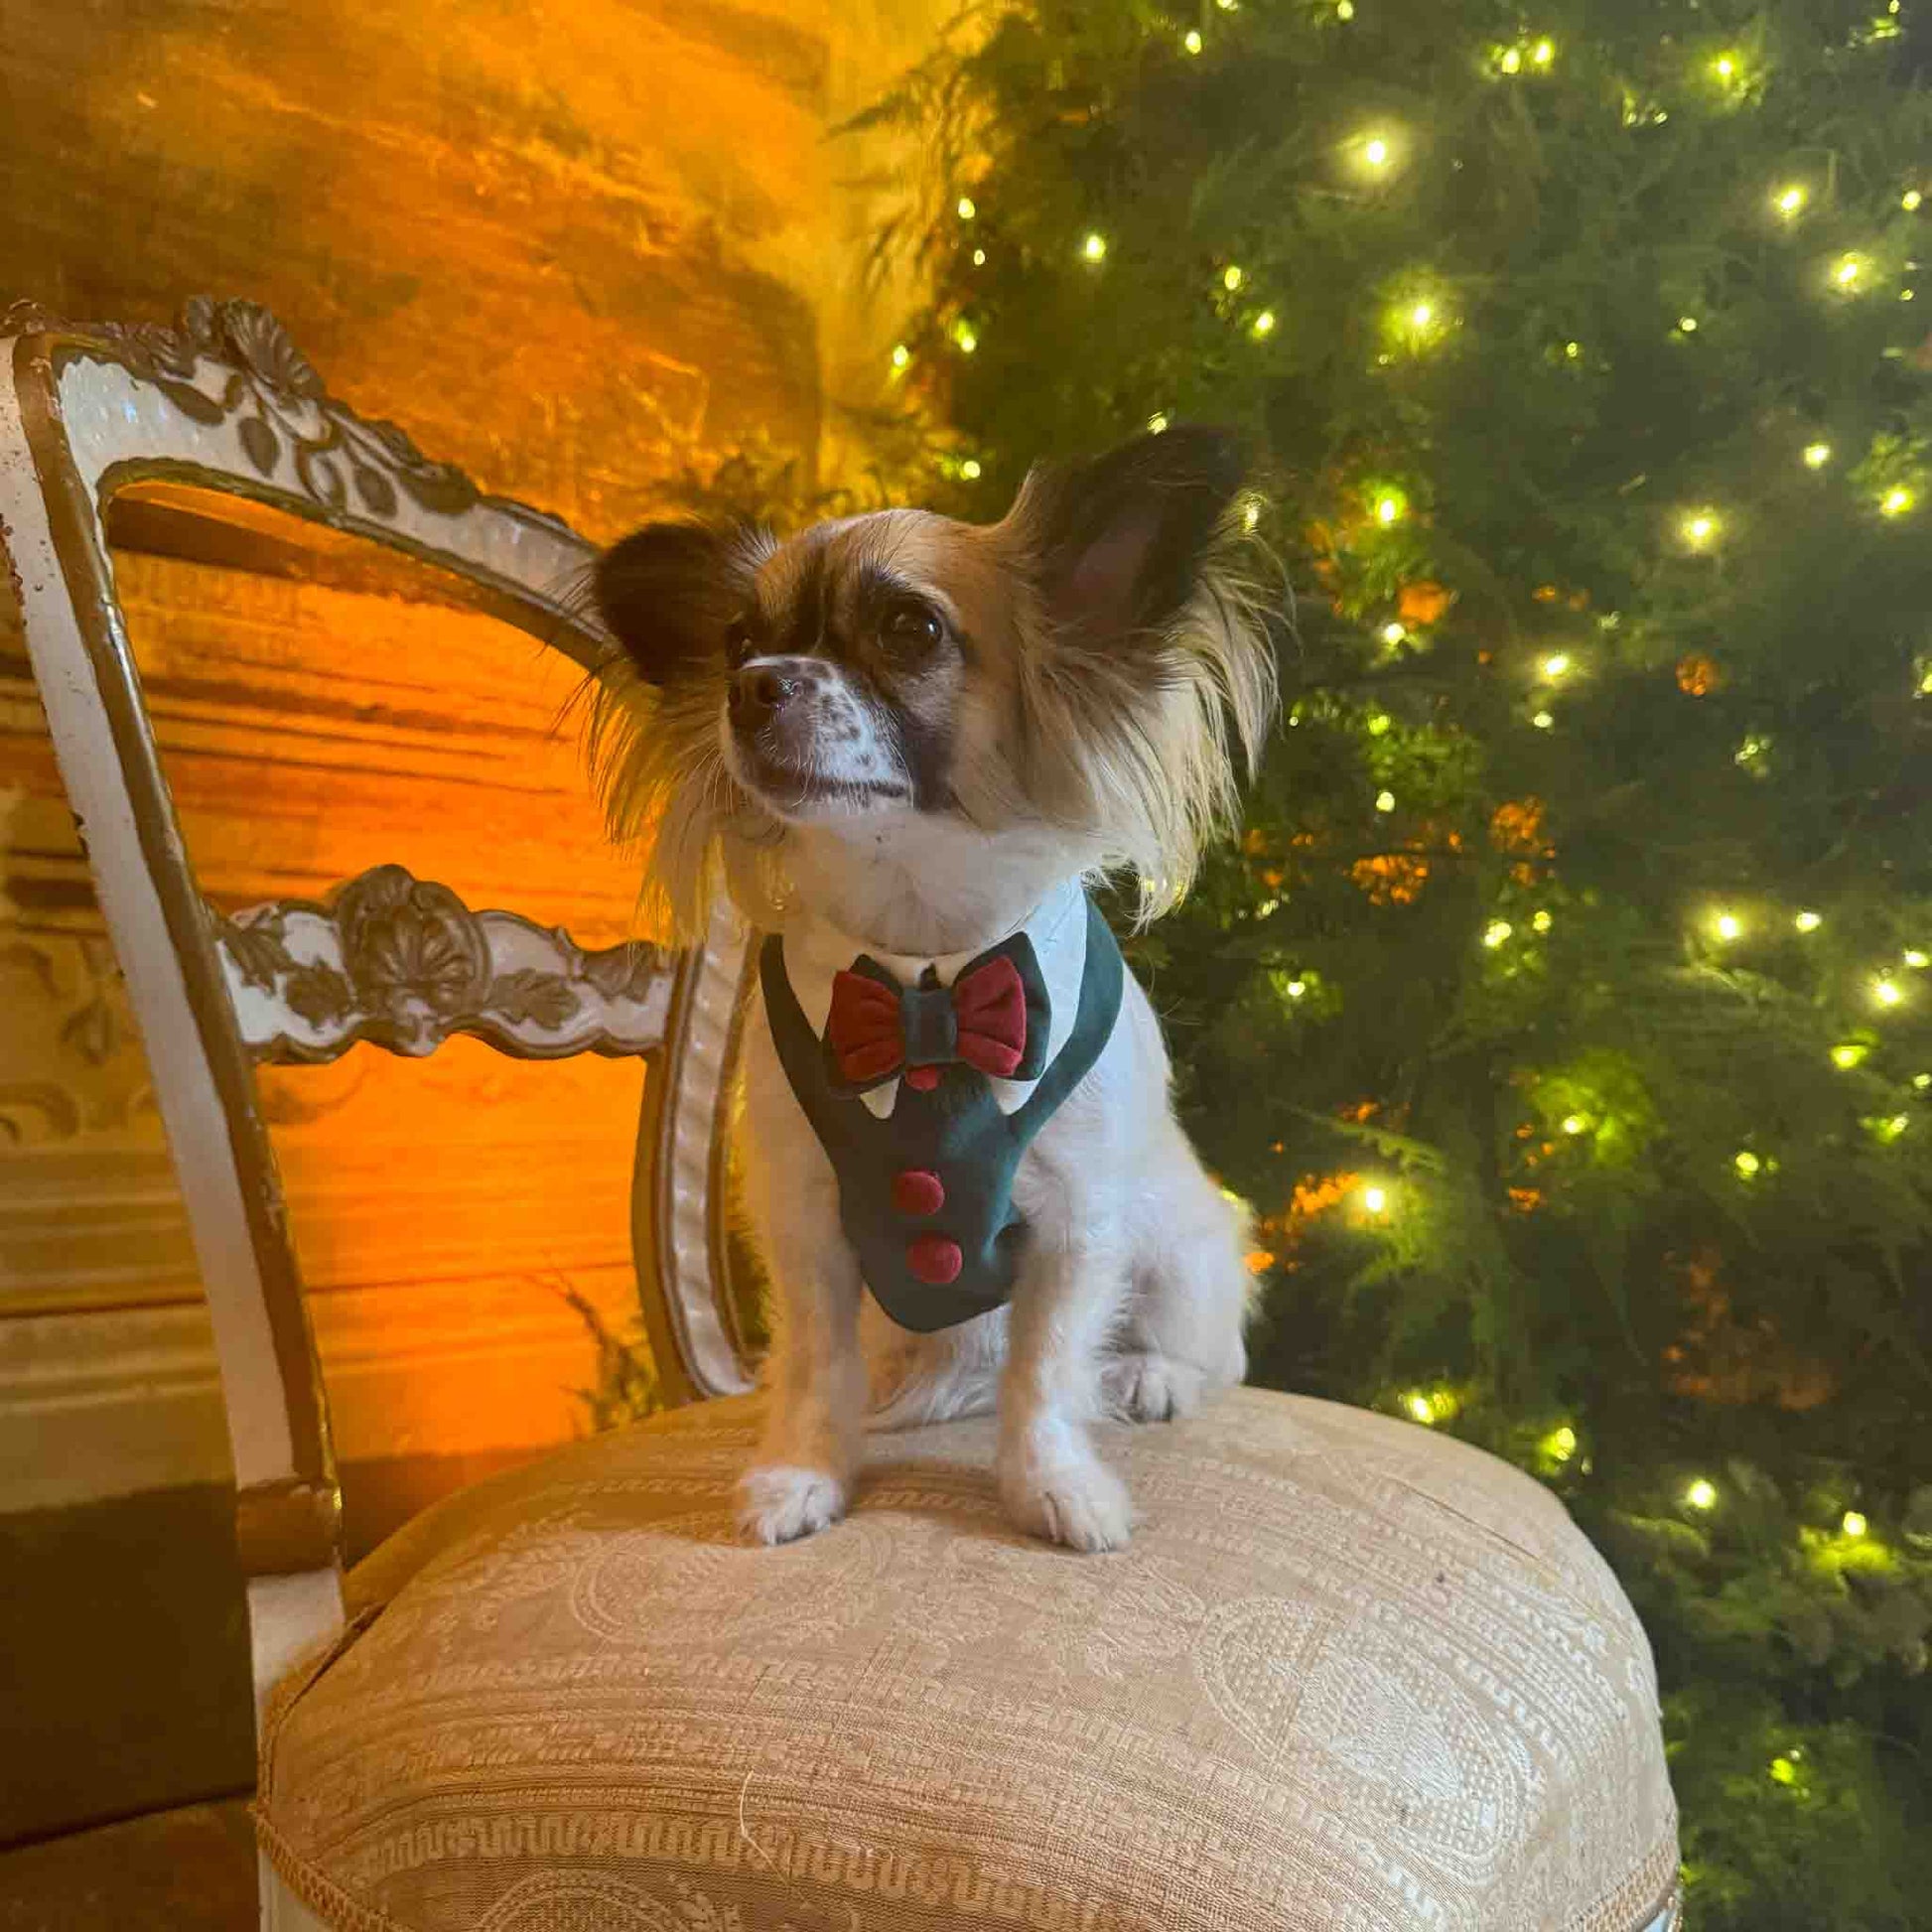 A small dog with long ears and a fluffy coat is sitting on a decorative chair in front of a Christmas tree with lights. The dog is wearing a green harness with a red bow tie and buttons, looking to the side with a calm expression.